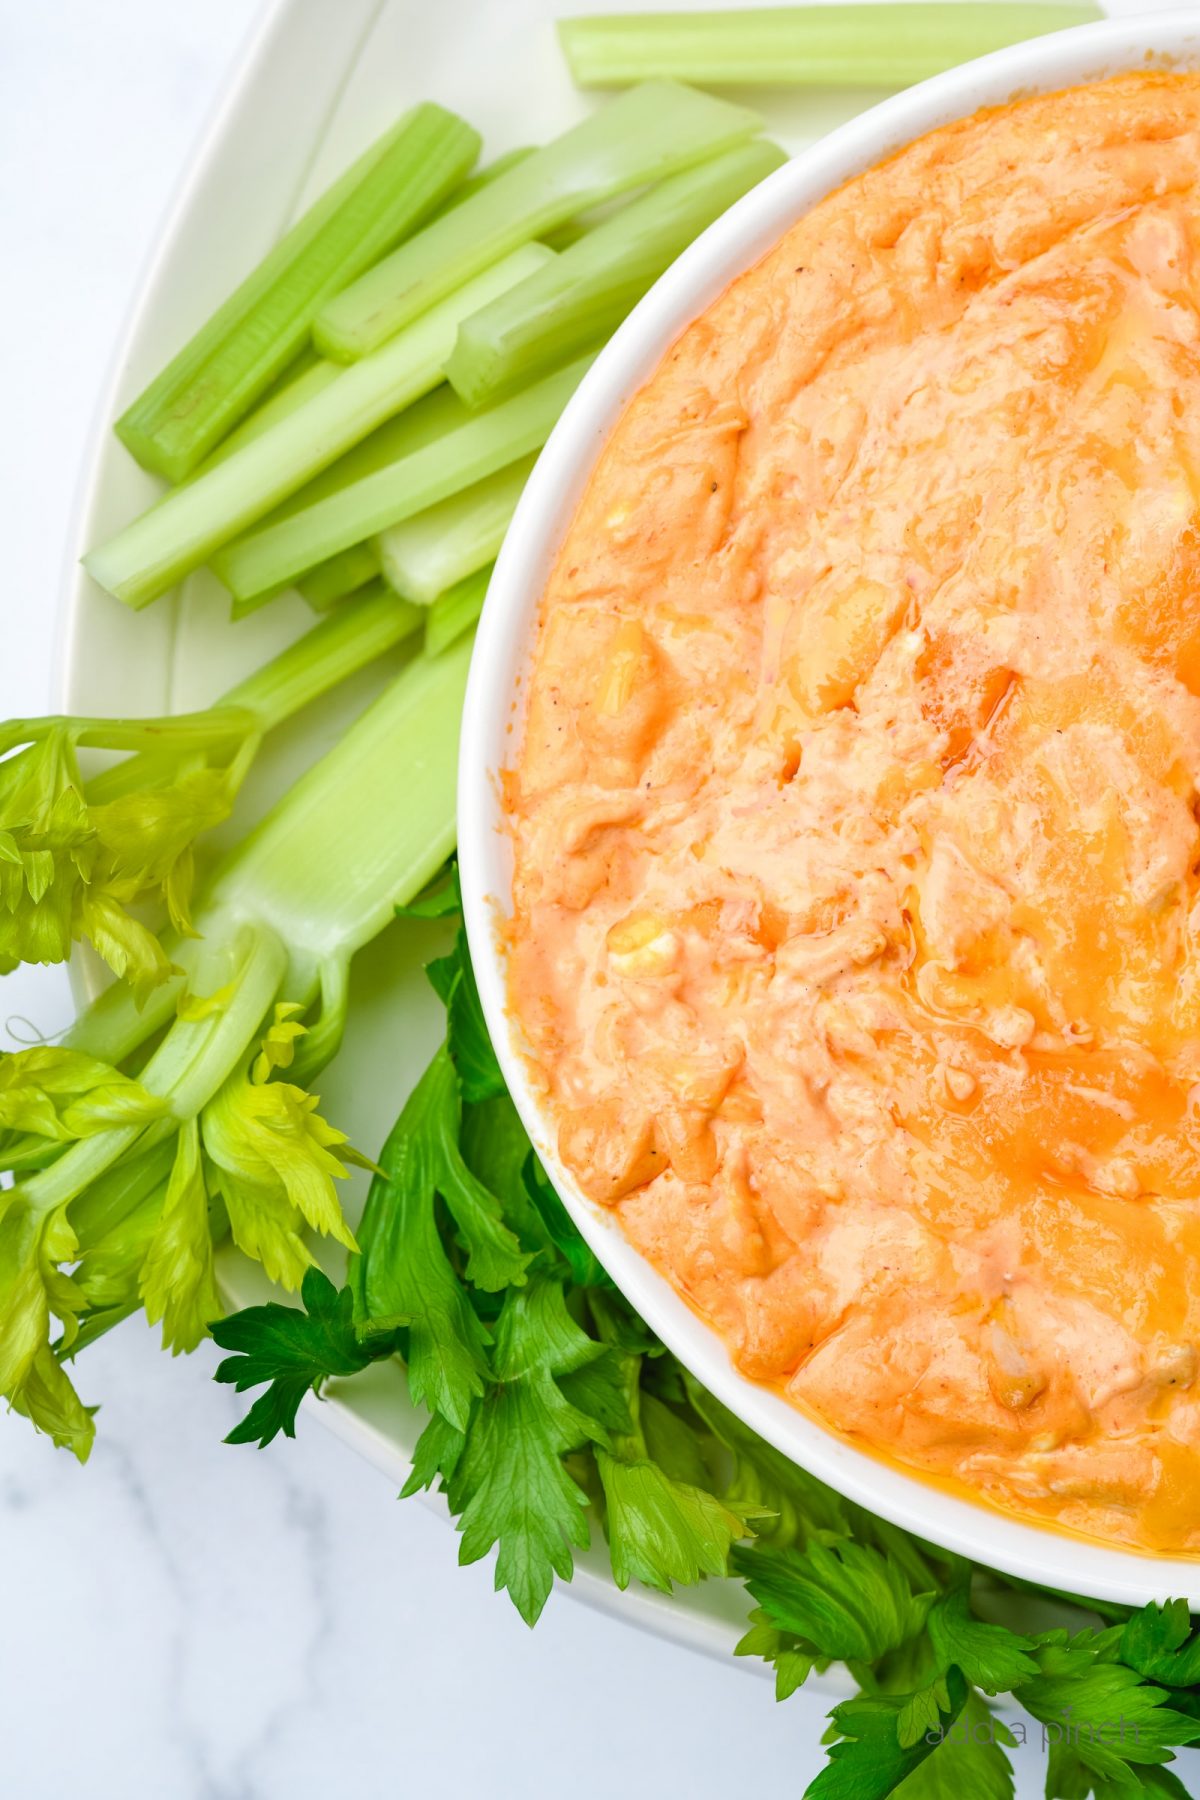 Buffalo Chicken Dip tastes like the buffalo chicken wings we love but without the clutter! This easy snack is made with just a handful of ingredients in the oven or slow cooker! // addapinch.com